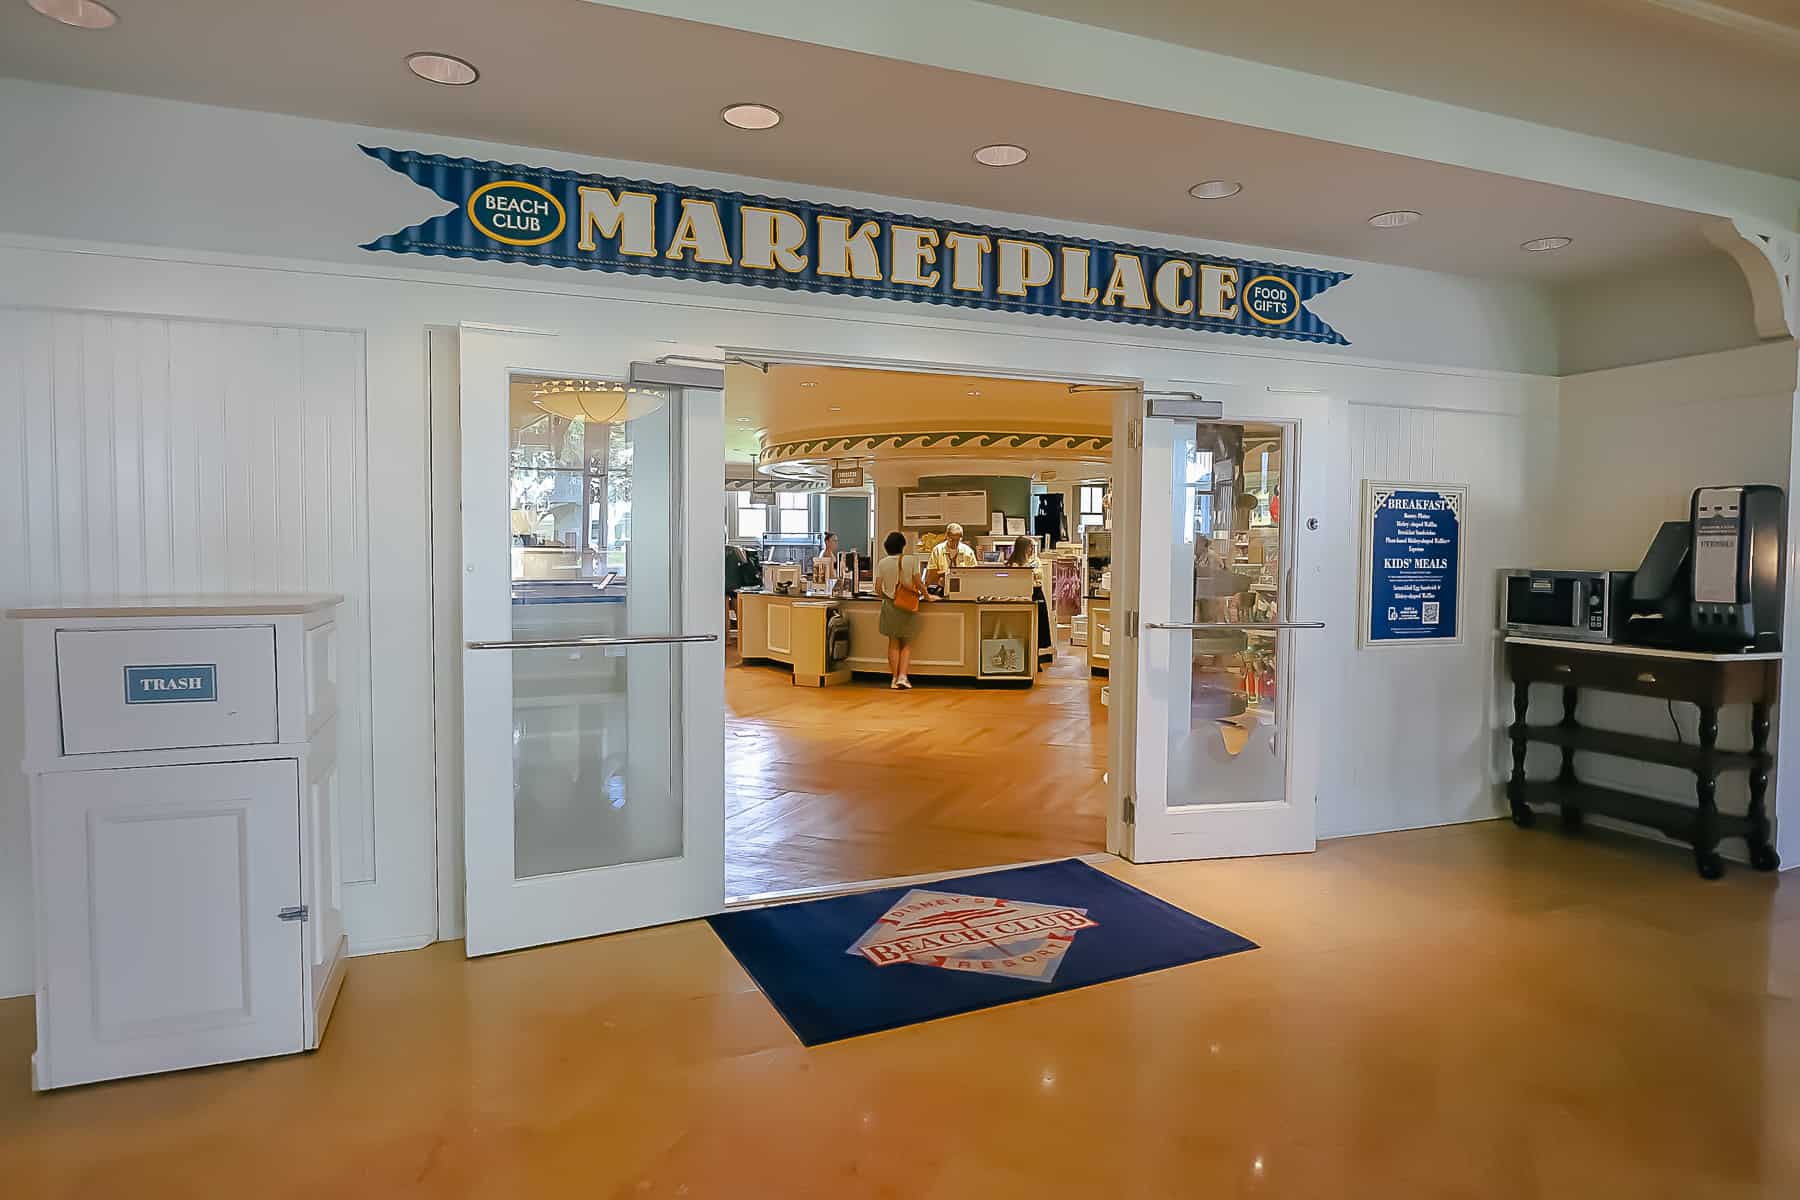 The Gift Shop at Disney’s Beach Club Resort (With Merchandise Photos)